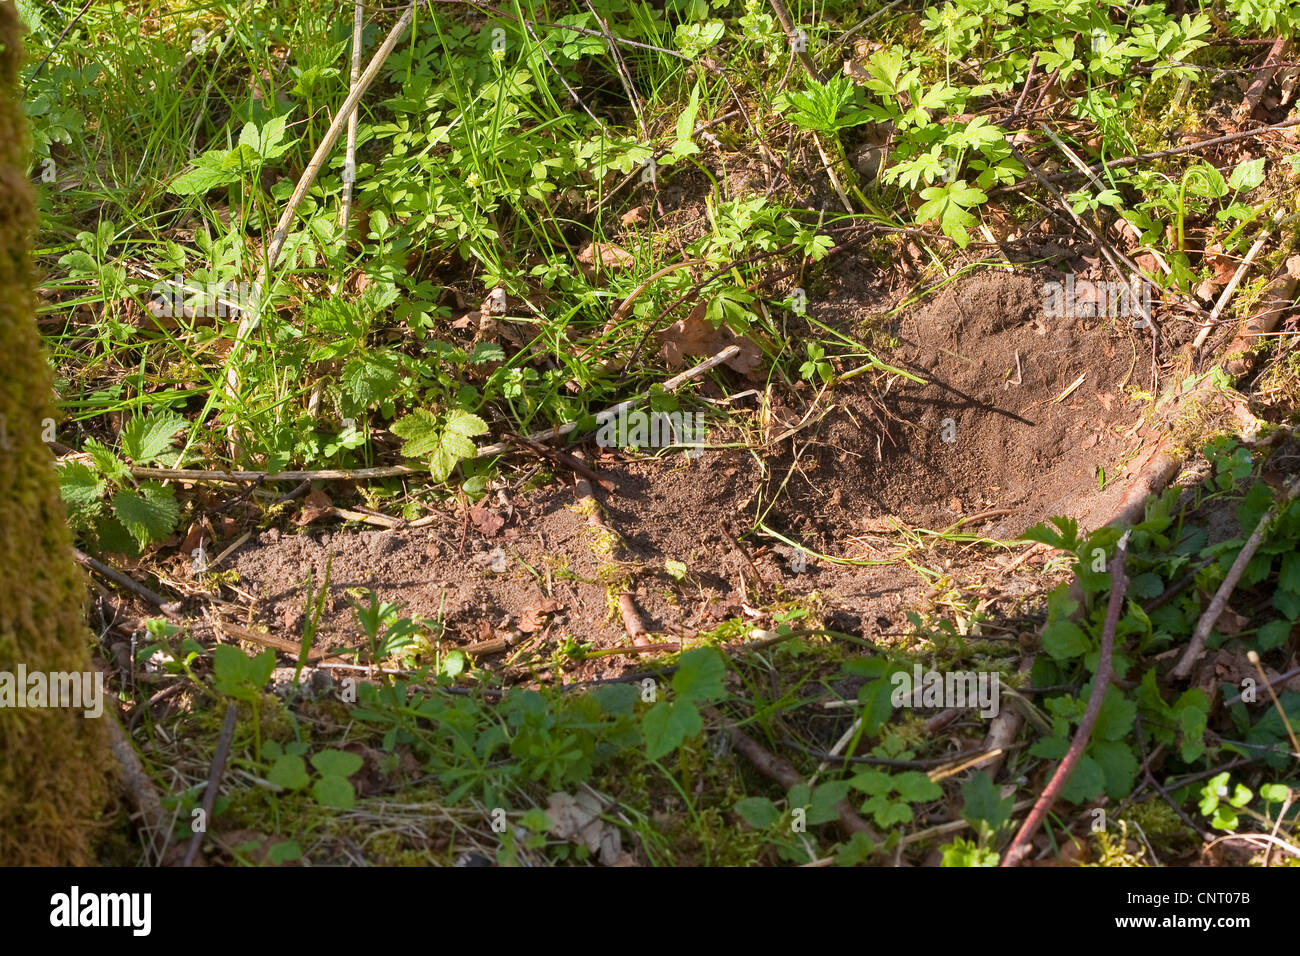 European hare (Lepus europaeus), resting place on forest ground Stock Photo